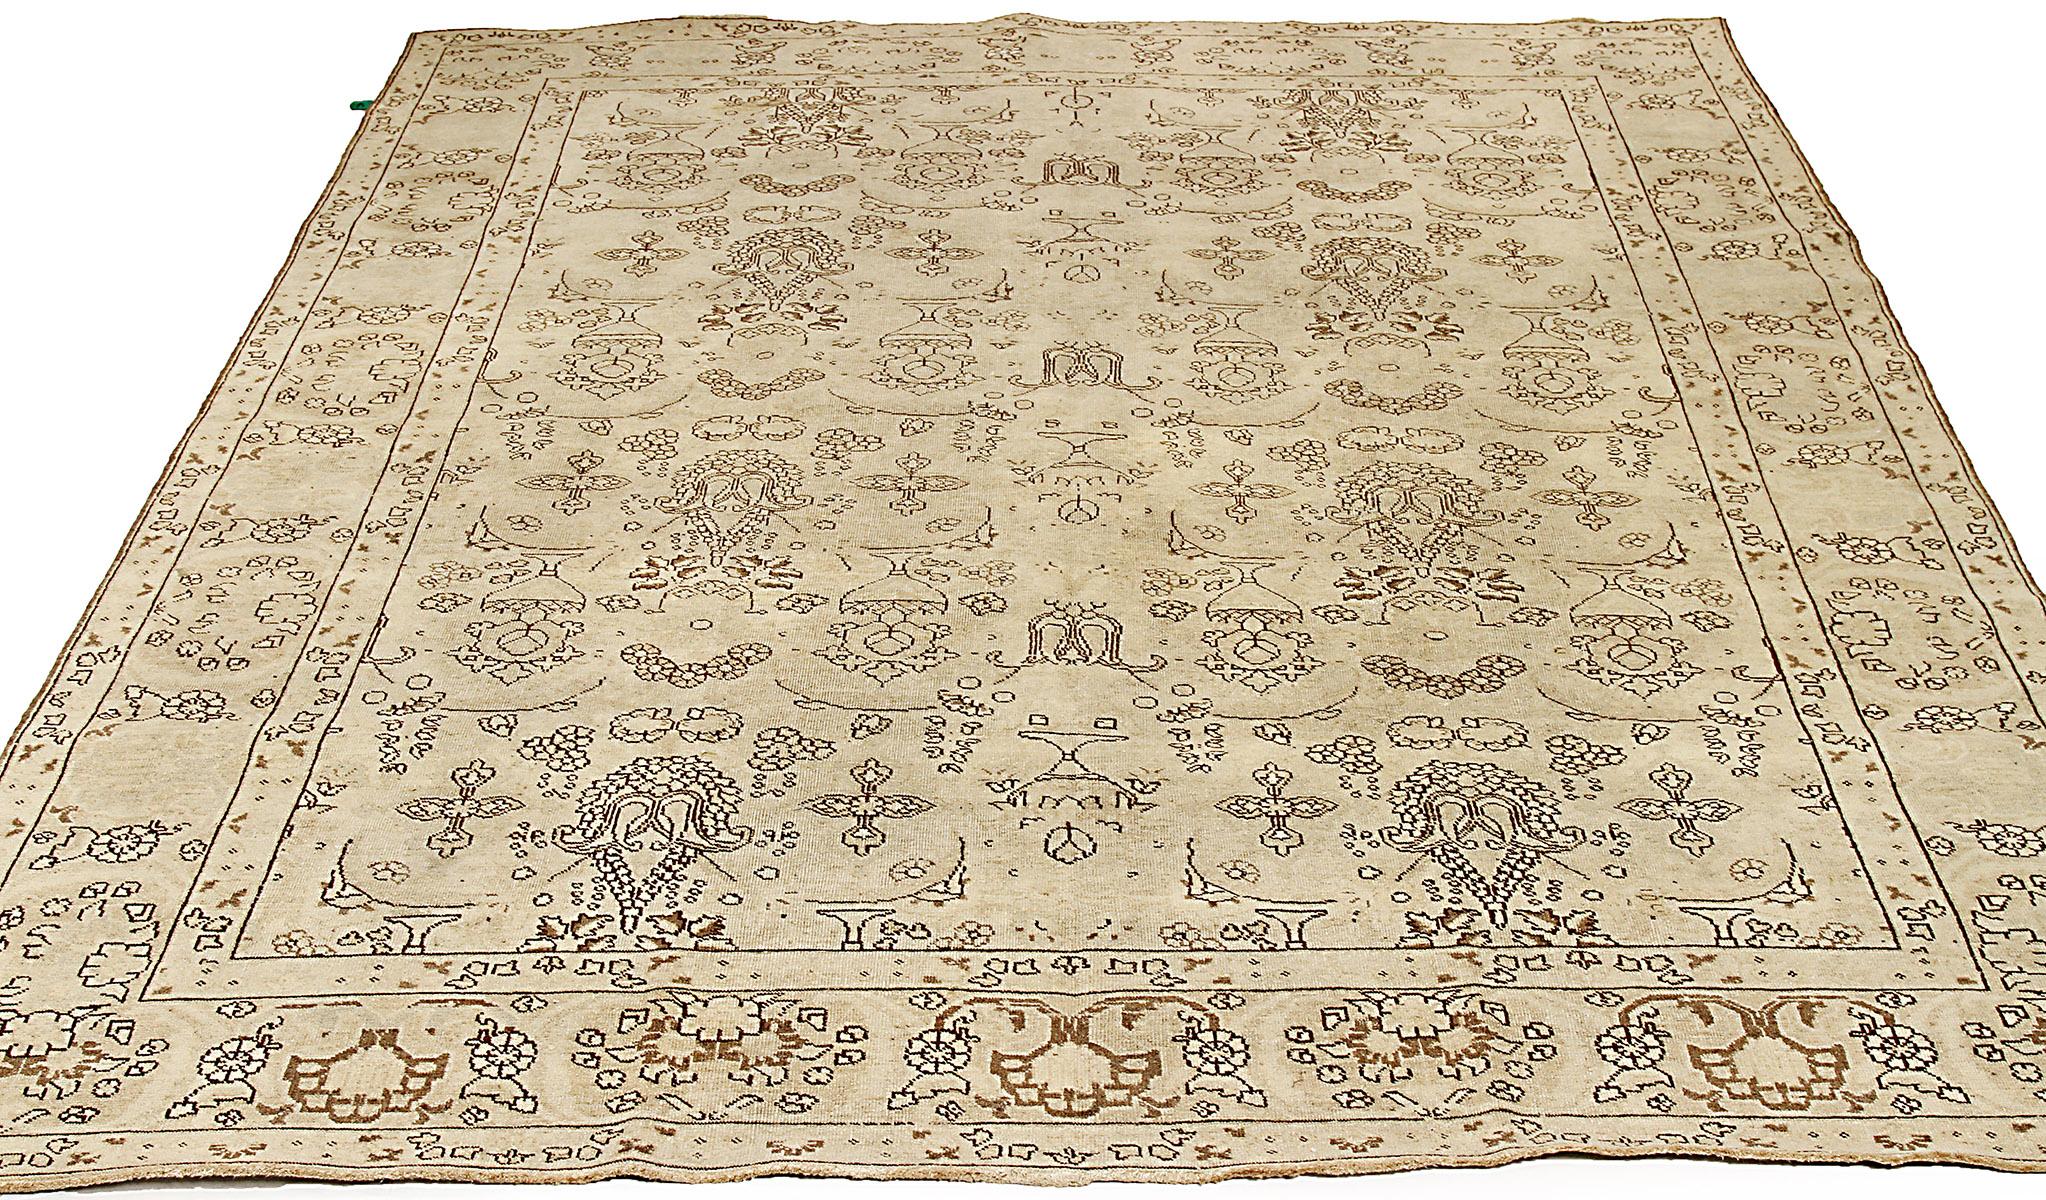 Antique Persian rug handwoven from the finest sheep’s wool and colored with all-natural vegetable dyes that are safe for humans and pets. It’s a traditional Tabriz weaving featuring a lovely ensemble of floral designs outlined in black with hints of